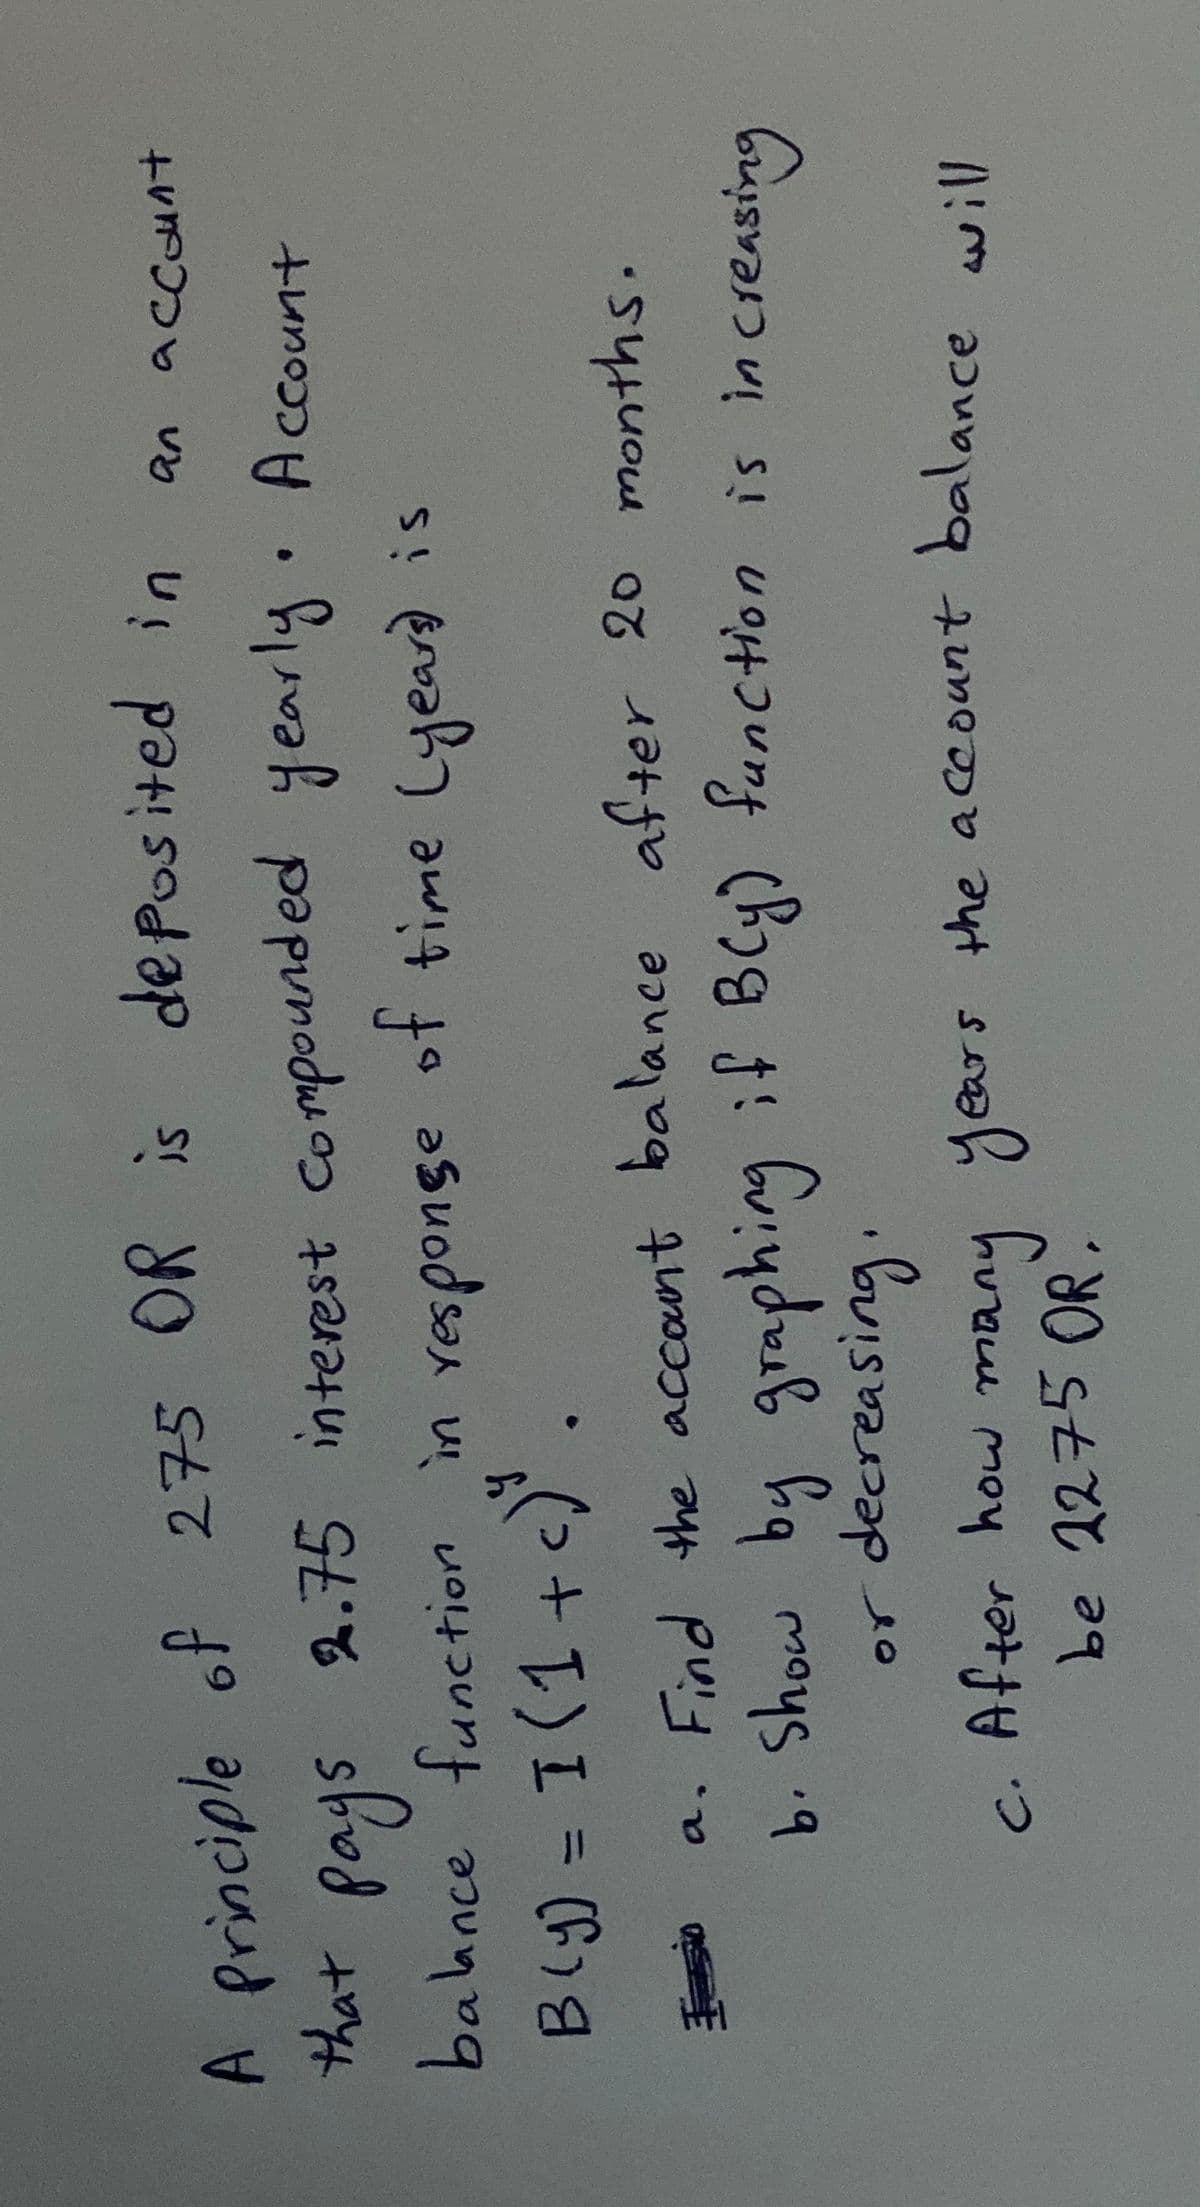 275 OR is deposited in
A Principle of
that
pays
balance func
2.75 interest Compounded yearly Account
ot time Lyeardis
əsuodsan u
tion in responge
Bly) = I(1+
%3D
a. Find the account balance after 20 months.
b. Show by graphing
or decreasing.
function is in creasing
C.
be 2275 OR.
c
After how ma
ny years
s the account balance will
